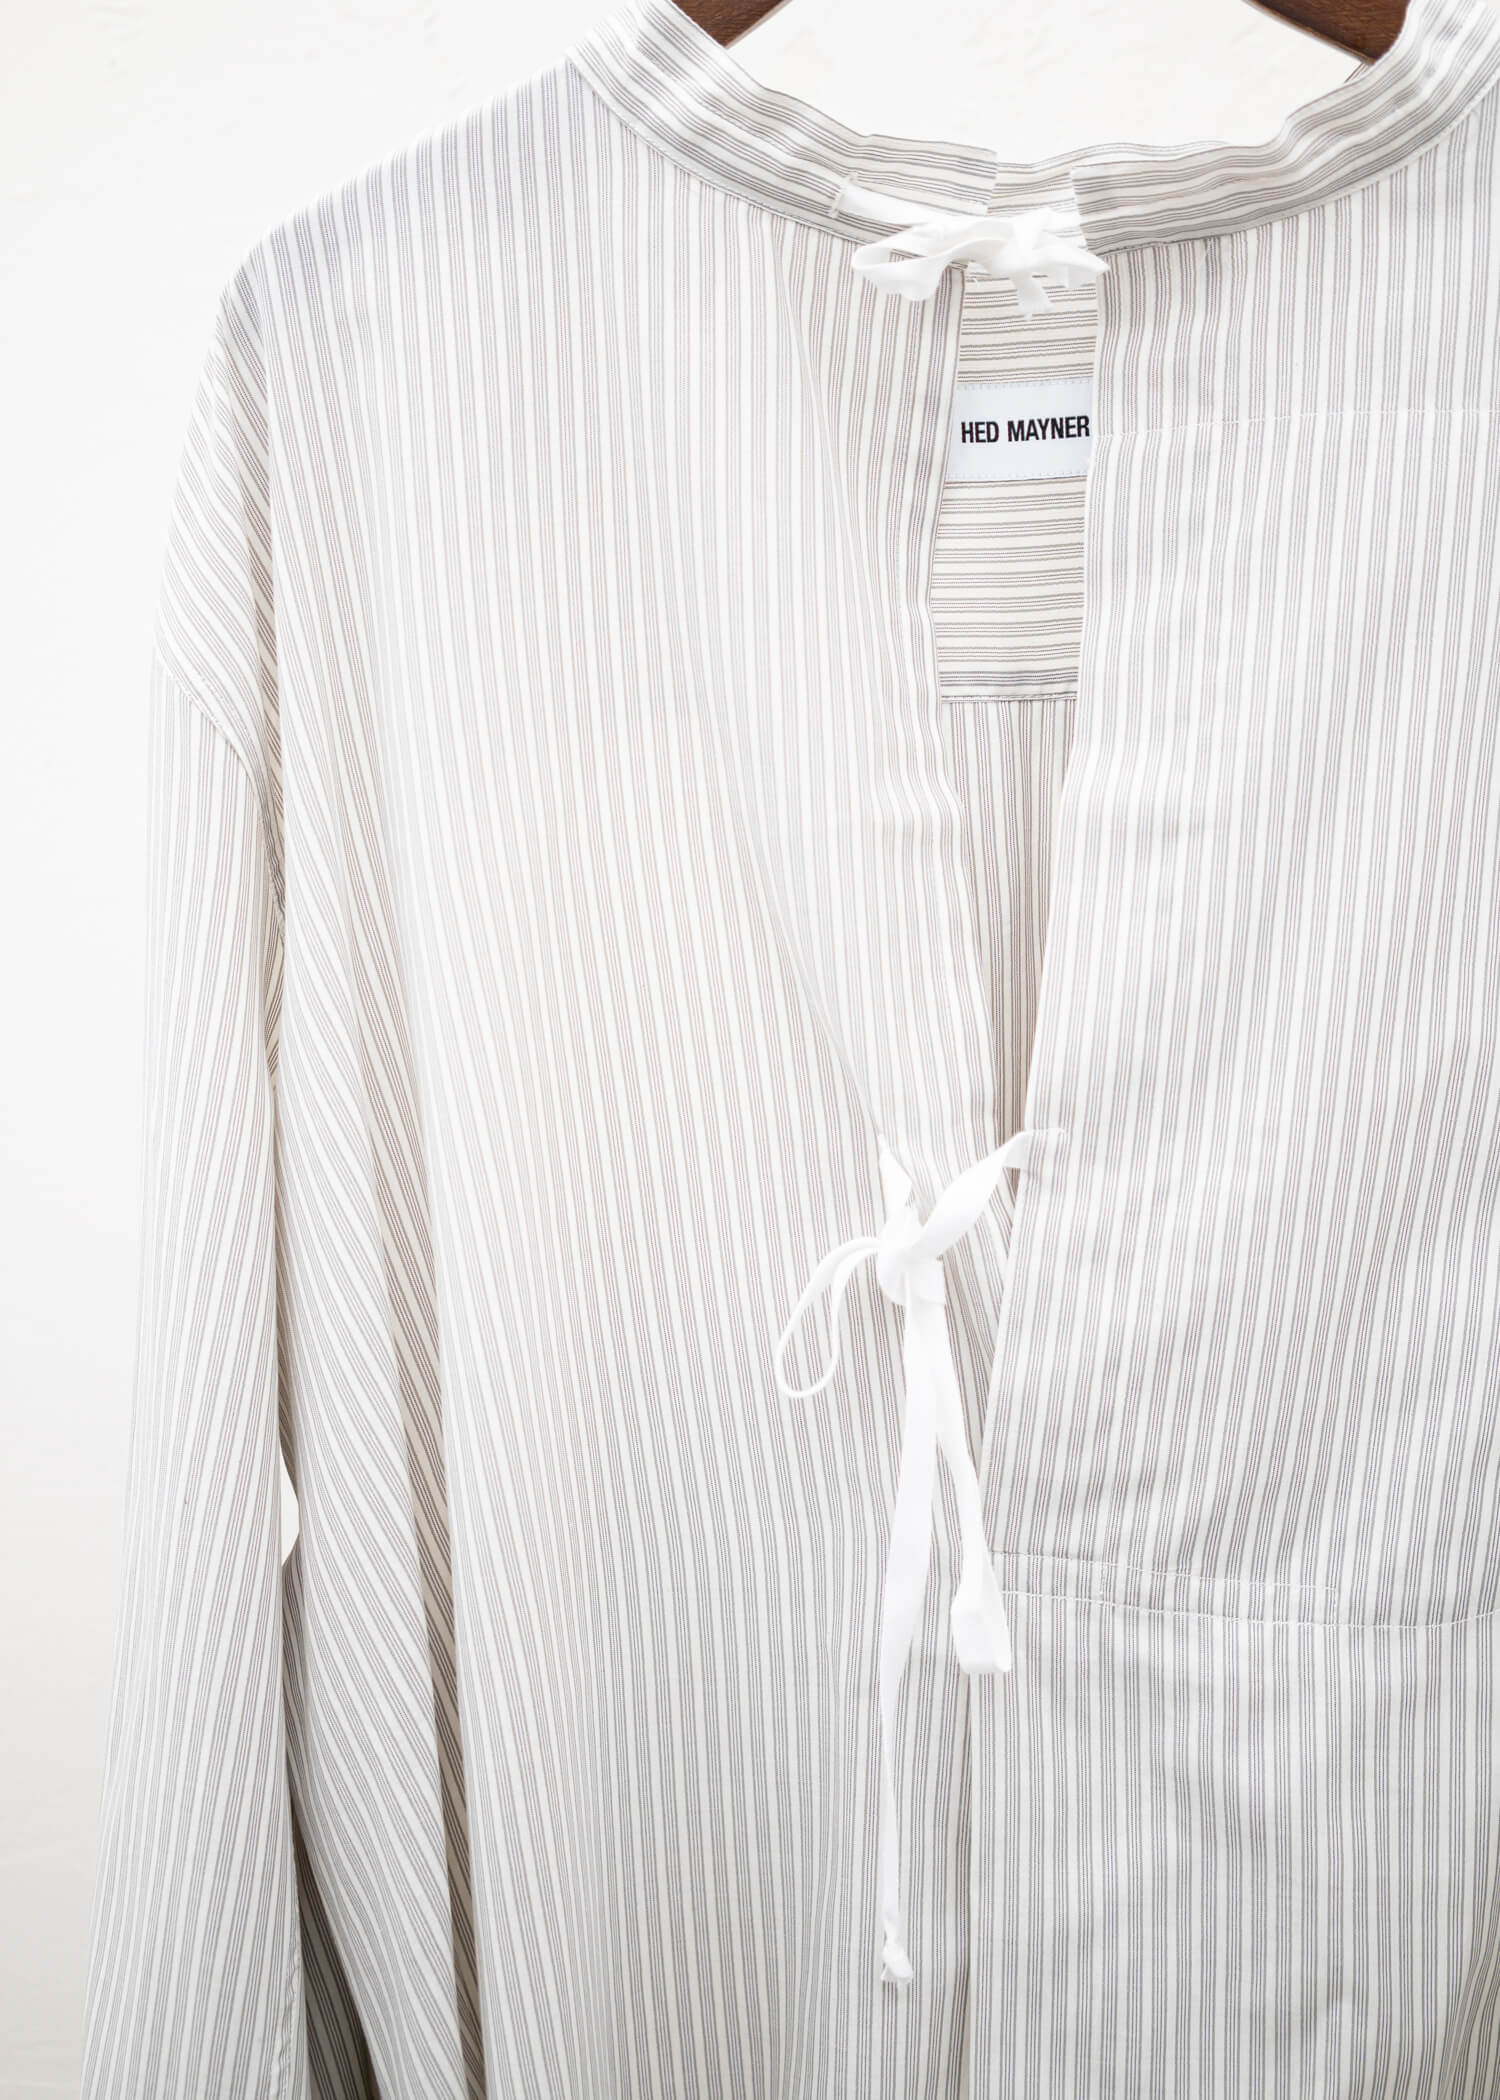 HED MAYNER PLEATED SHIRT COOL GREY PINSTRIPES